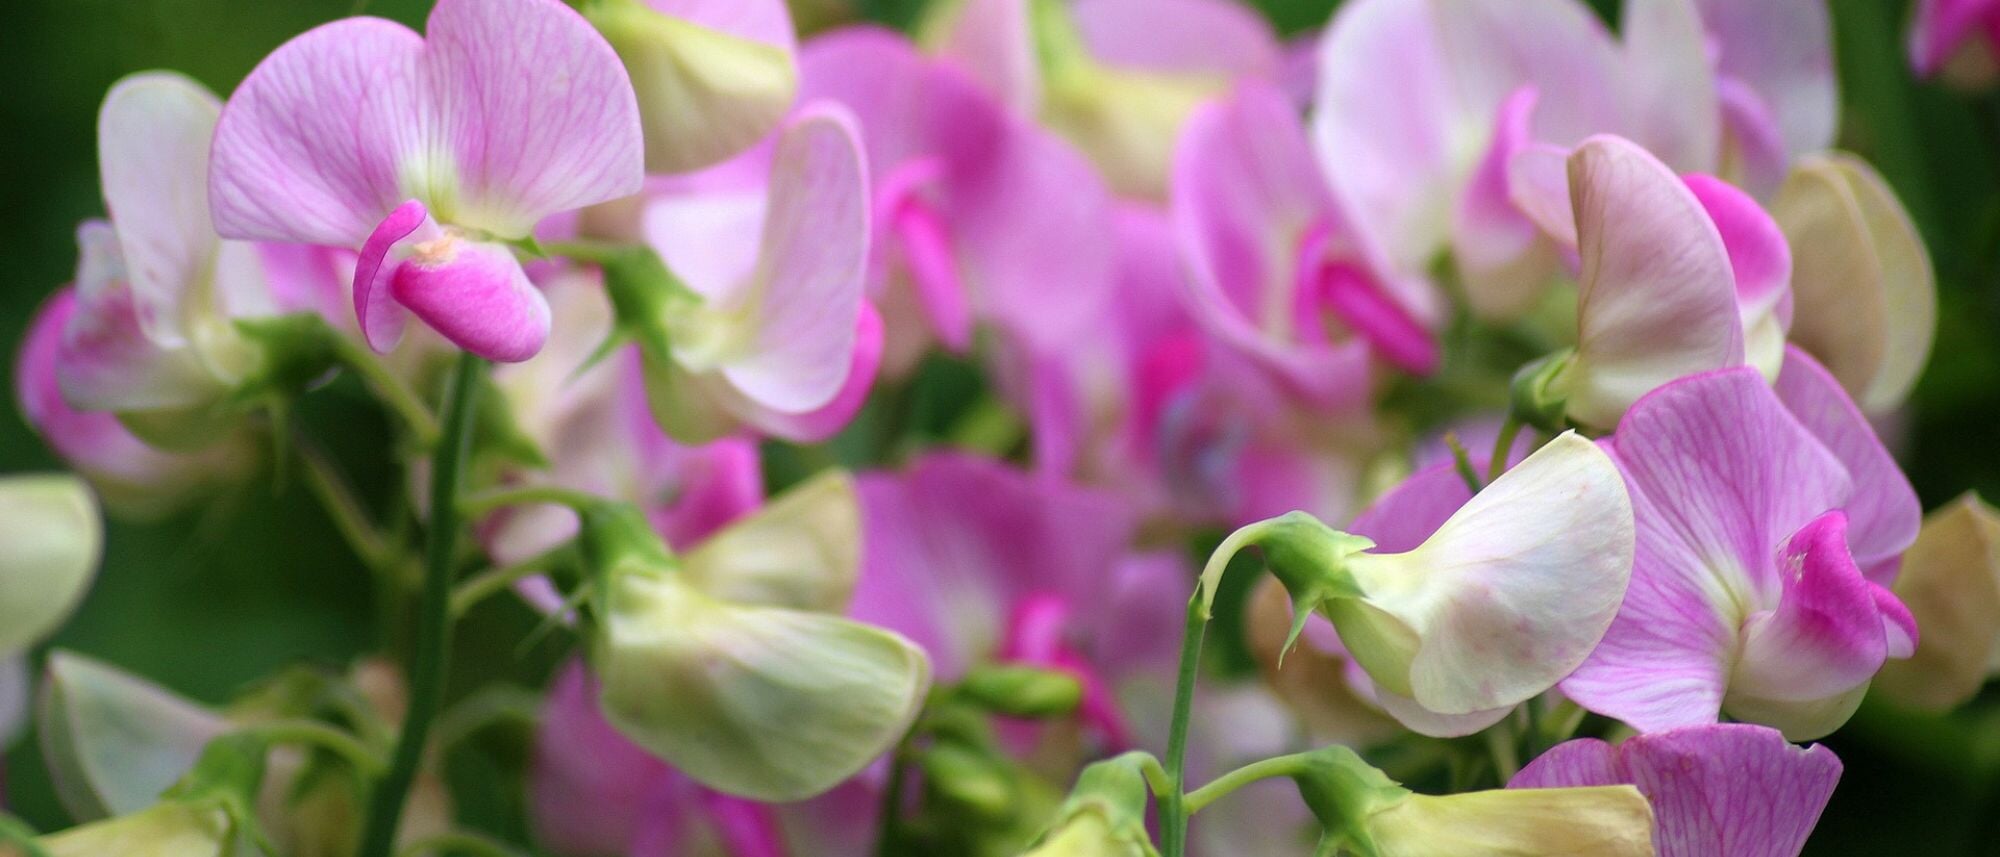 Grow sweet pea flowers at home